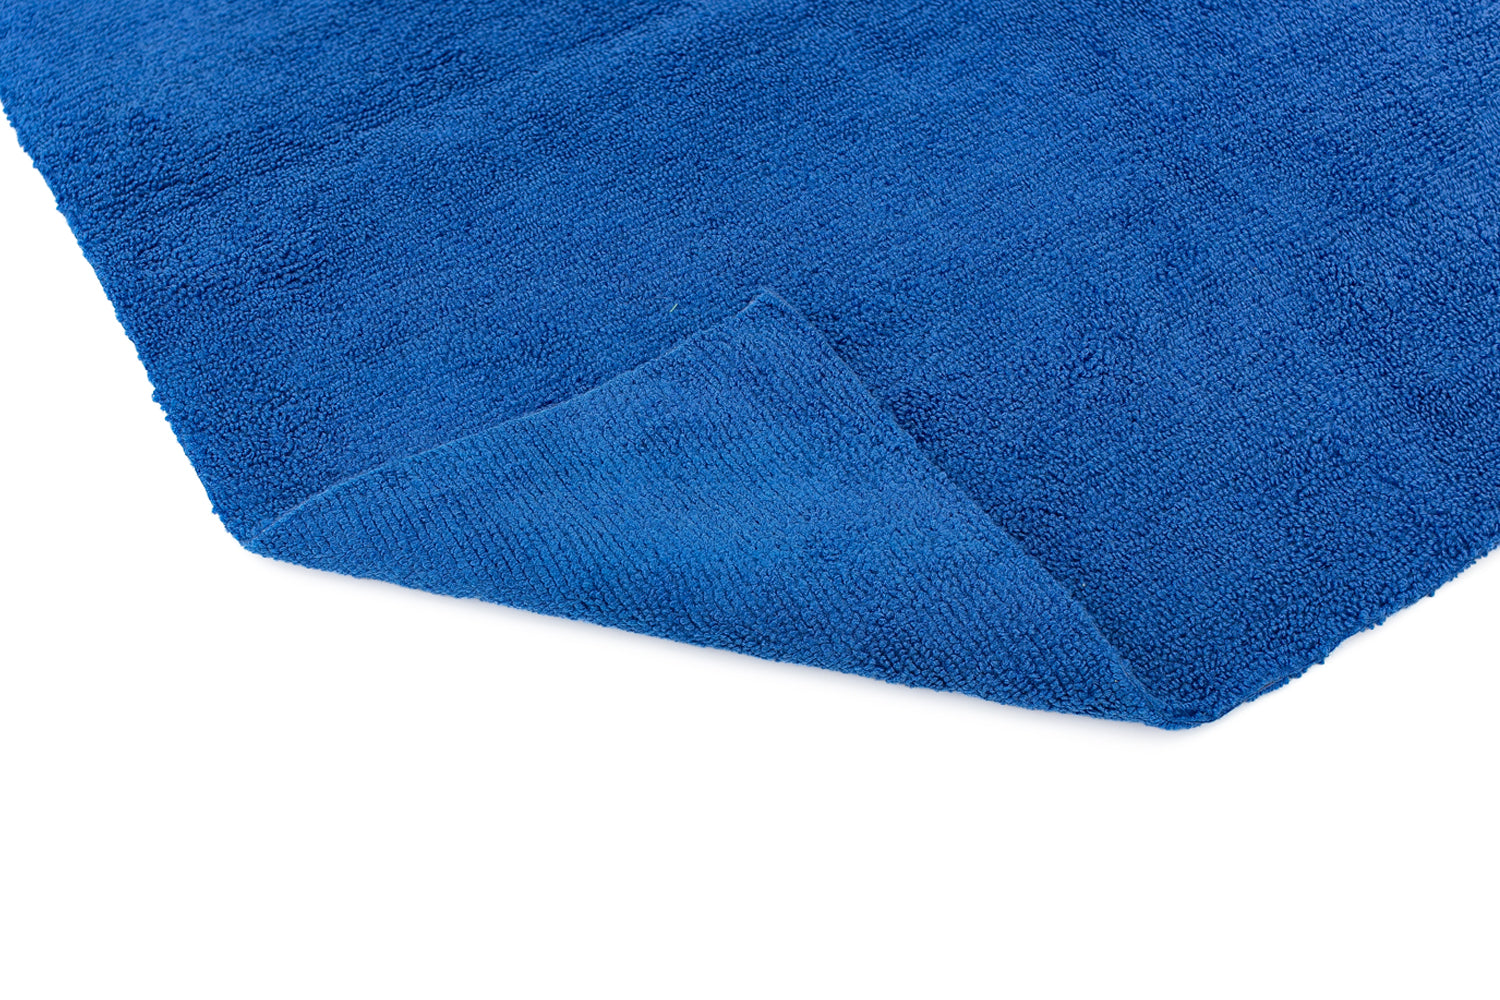 The Rag Company - Edgeless 365 - 16in. x 16in - Royal Blue